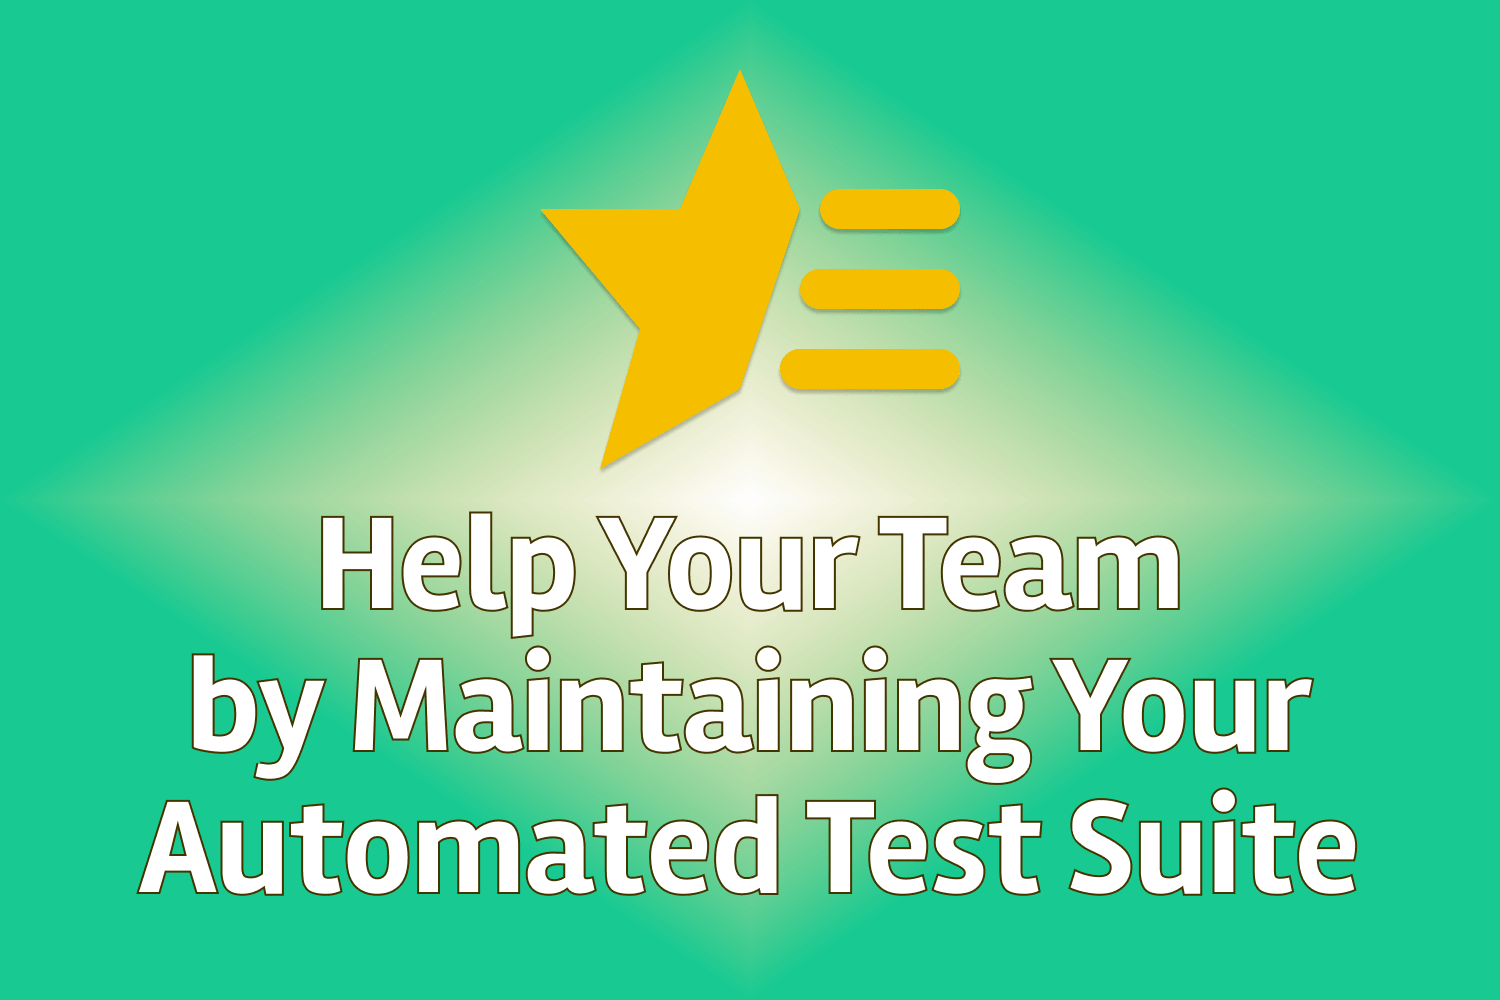 Help Your Team by Maintaining Your Automated Test Suite